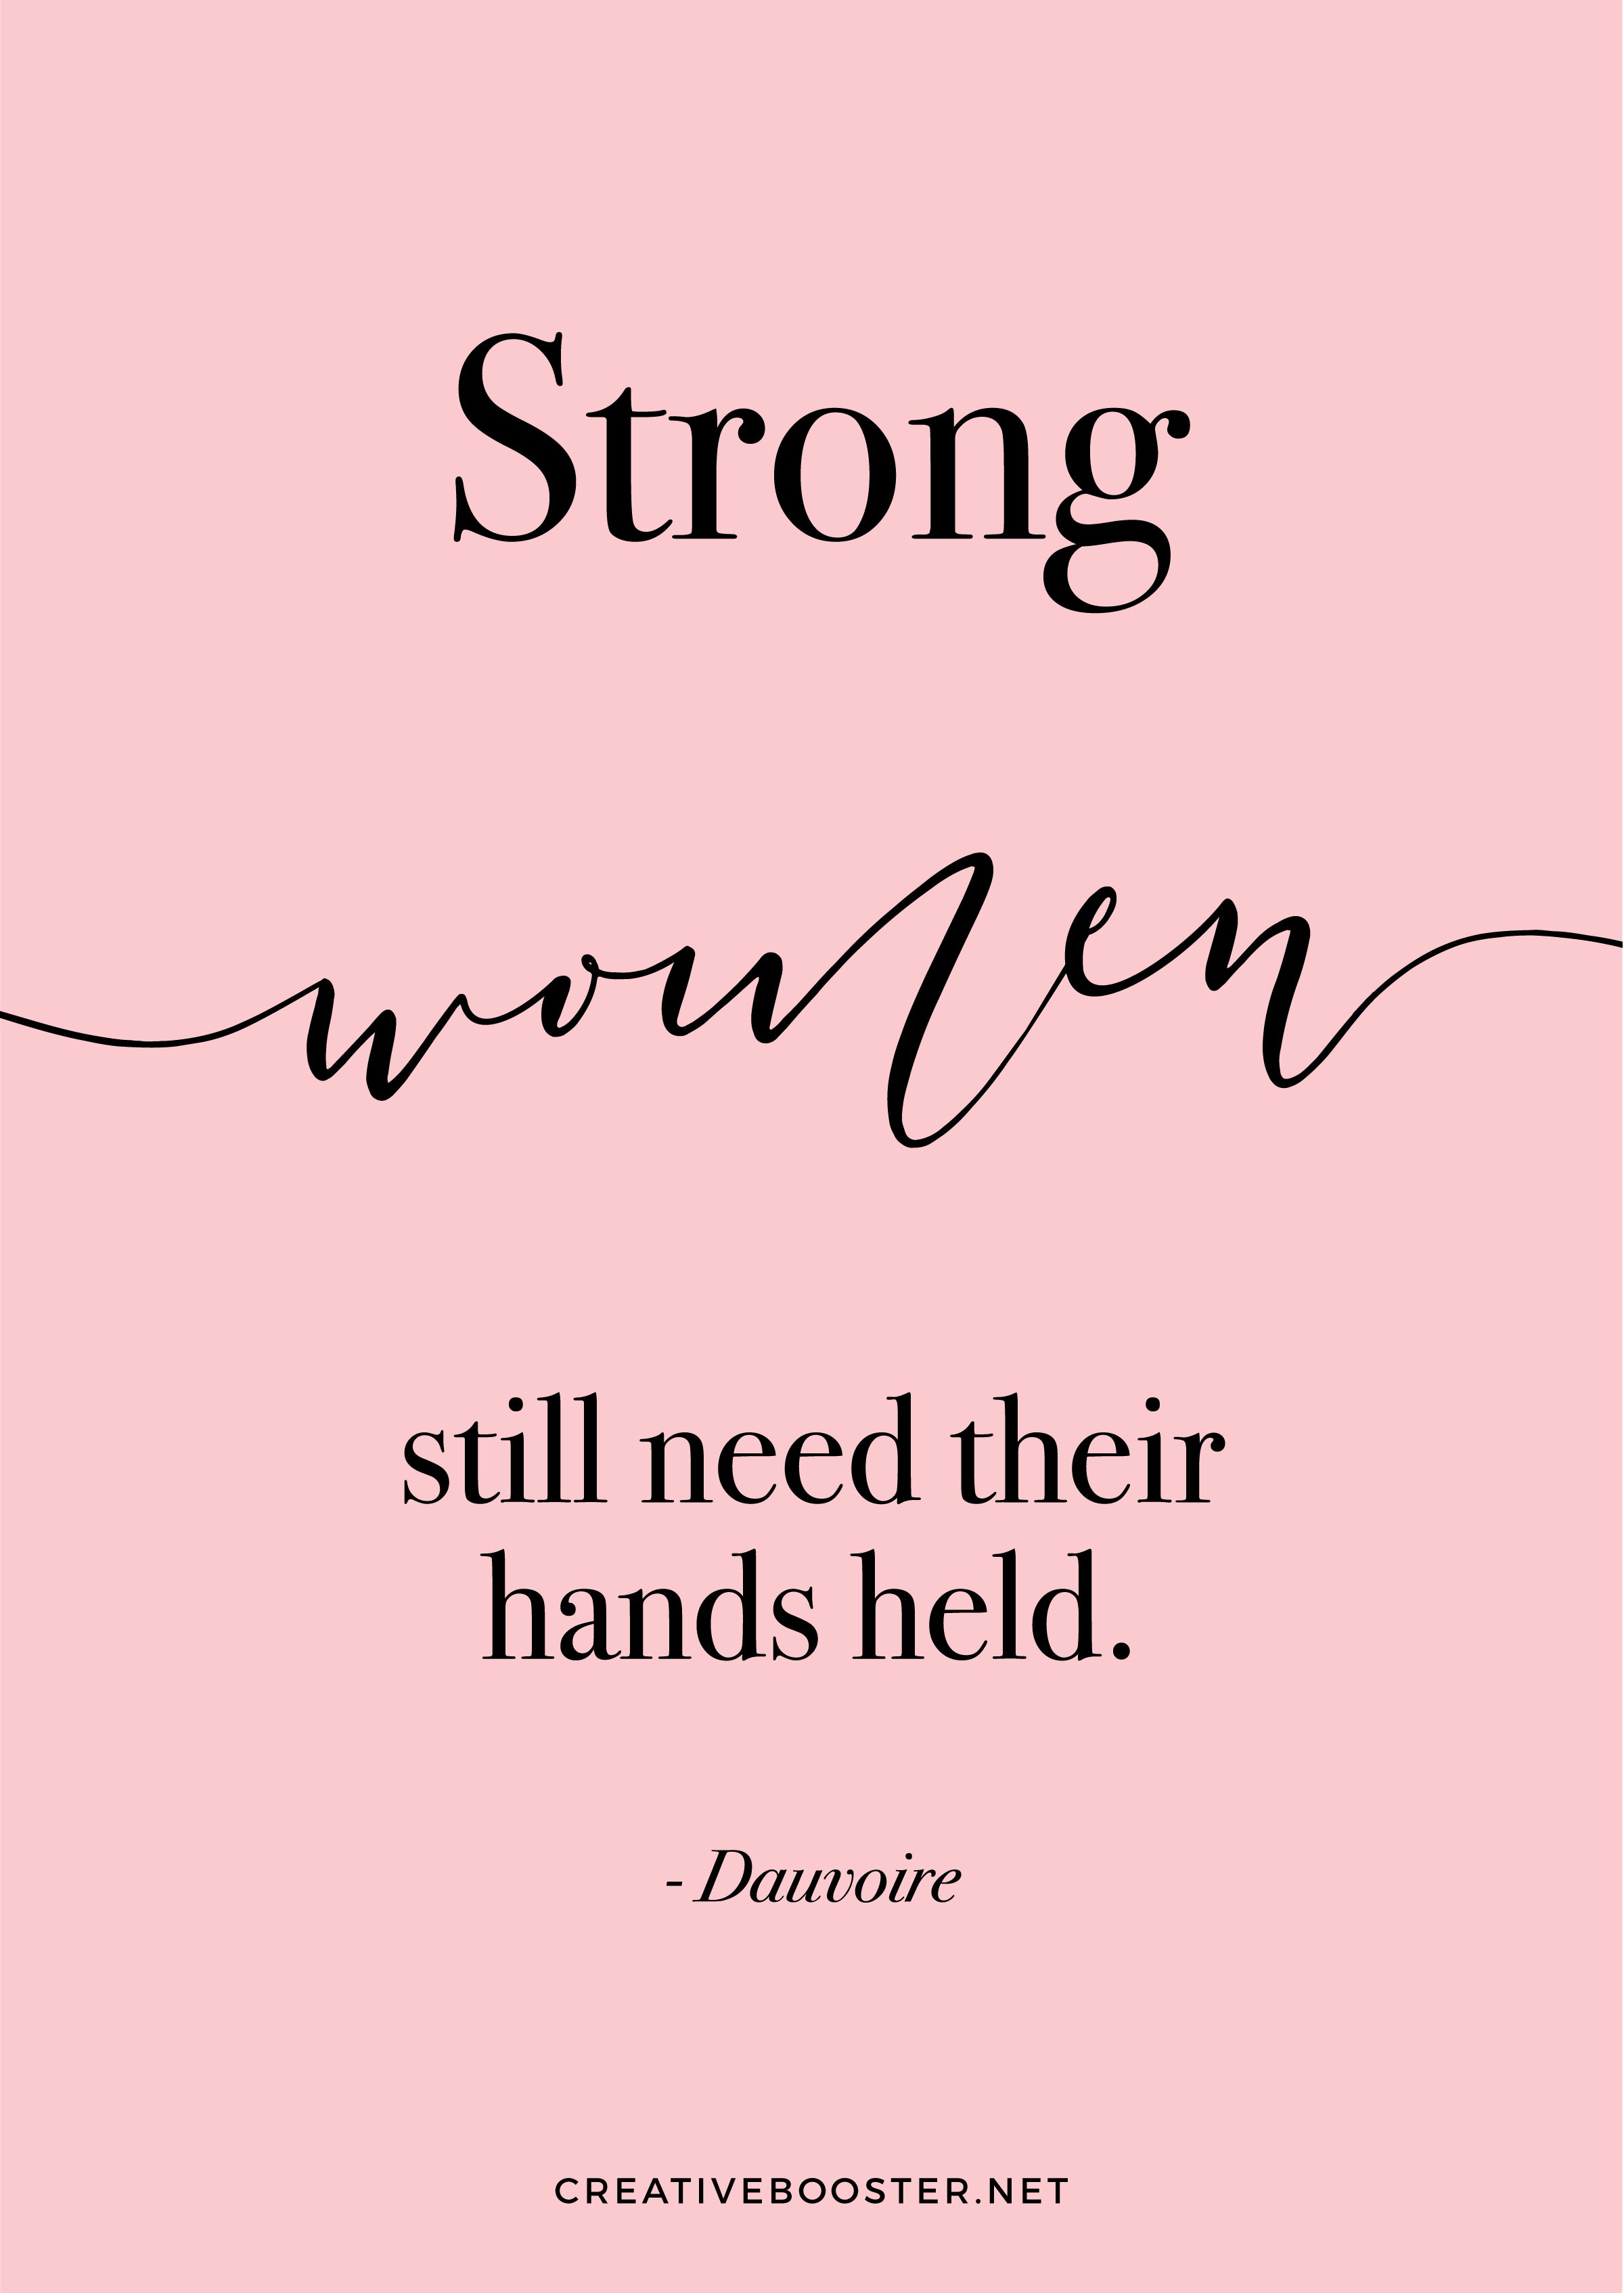 You-Got-This-Quotes-For-Her-“Strong women still need their hands held.” – Dauvoire (Quote Art Print)